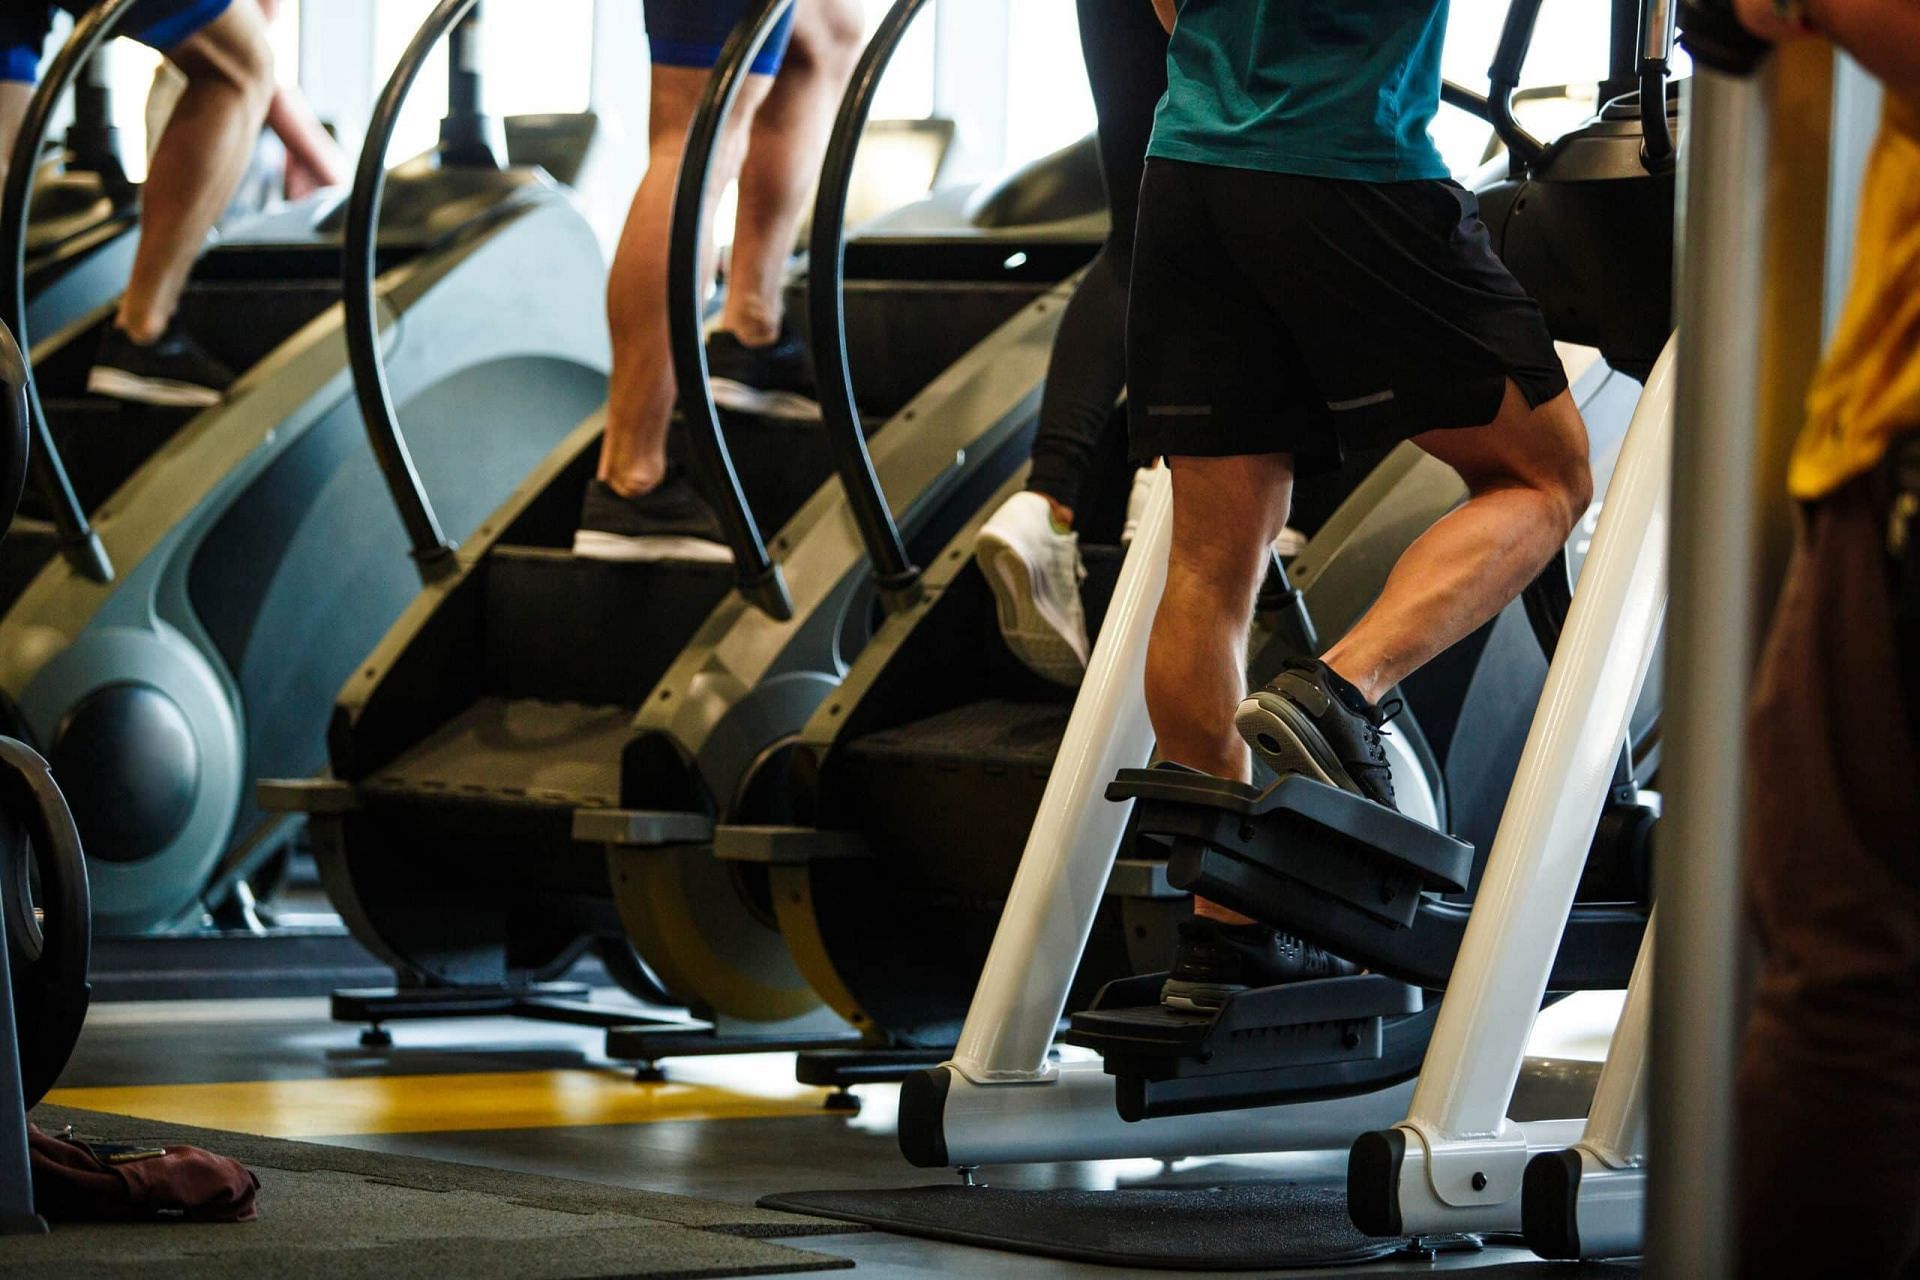 The machine&#039;s ability to maintain continuous movement and resistance results in an elevated heart rate. (Istock)